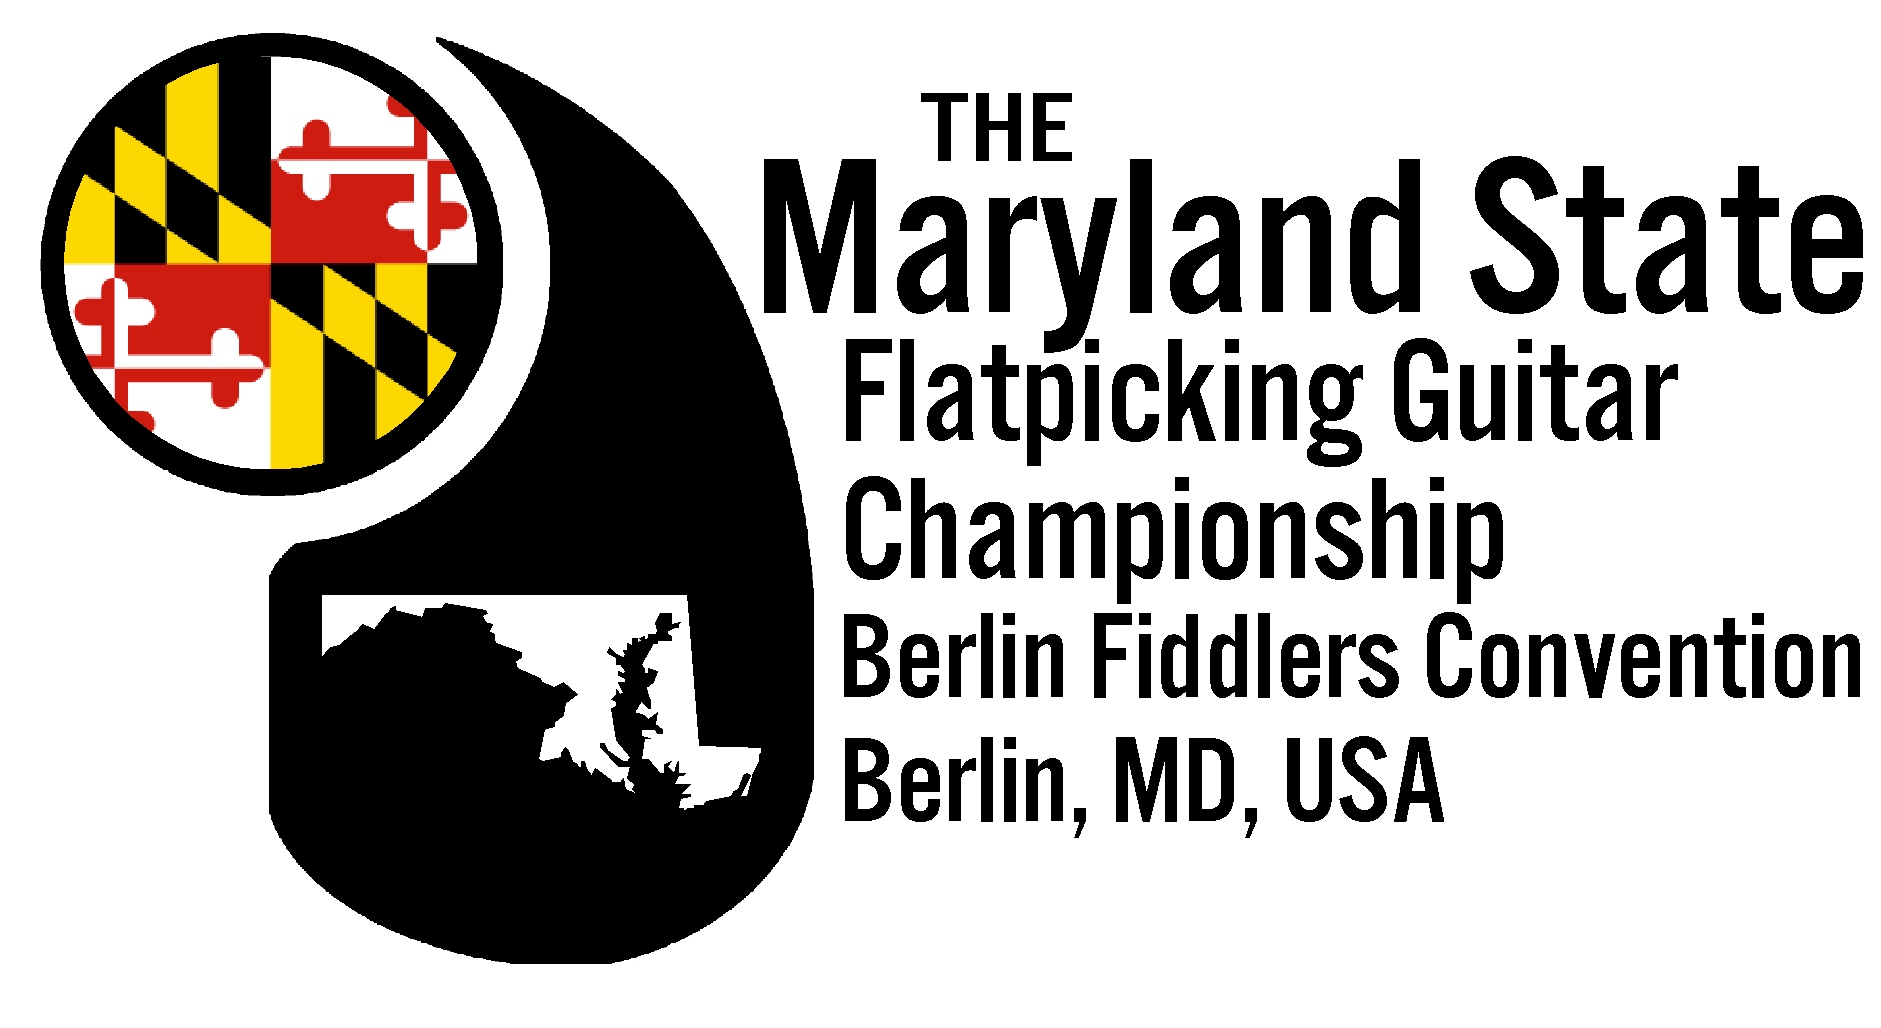 Maryland State Flatpicking Guitar Championship Berlin Fiddlers Convention Berlin, MD